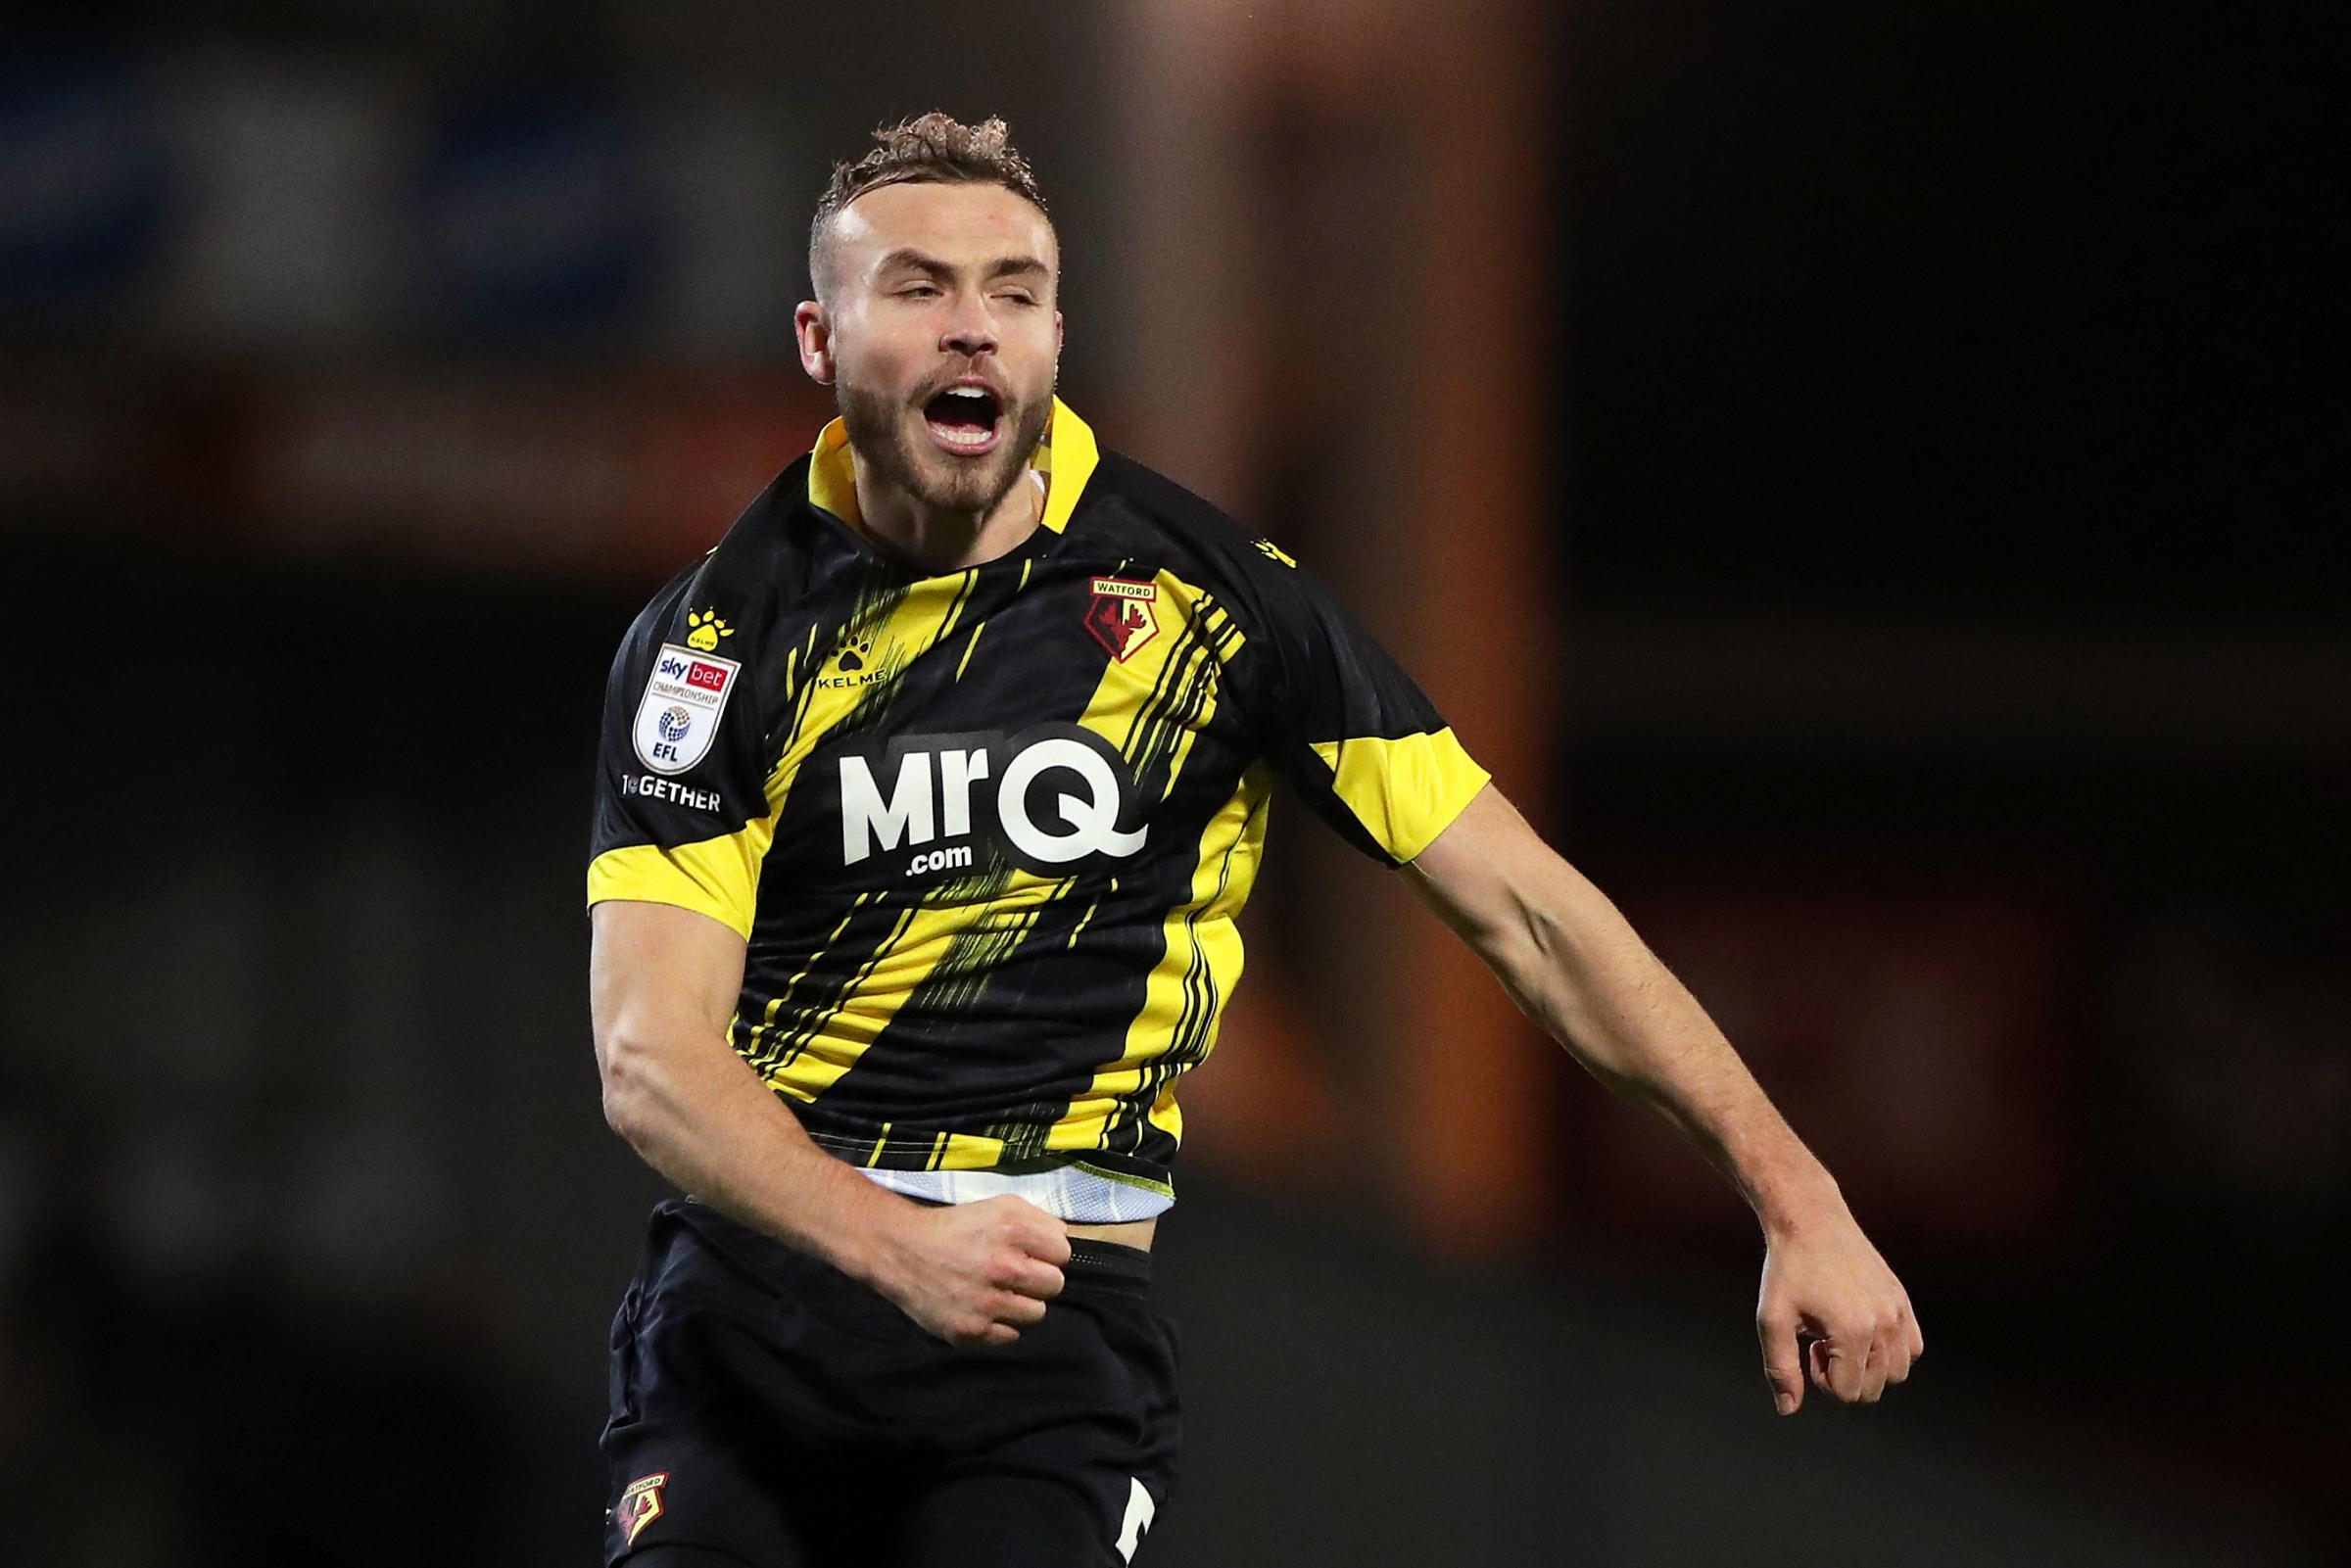 Porteous says Watford need to find that spark again